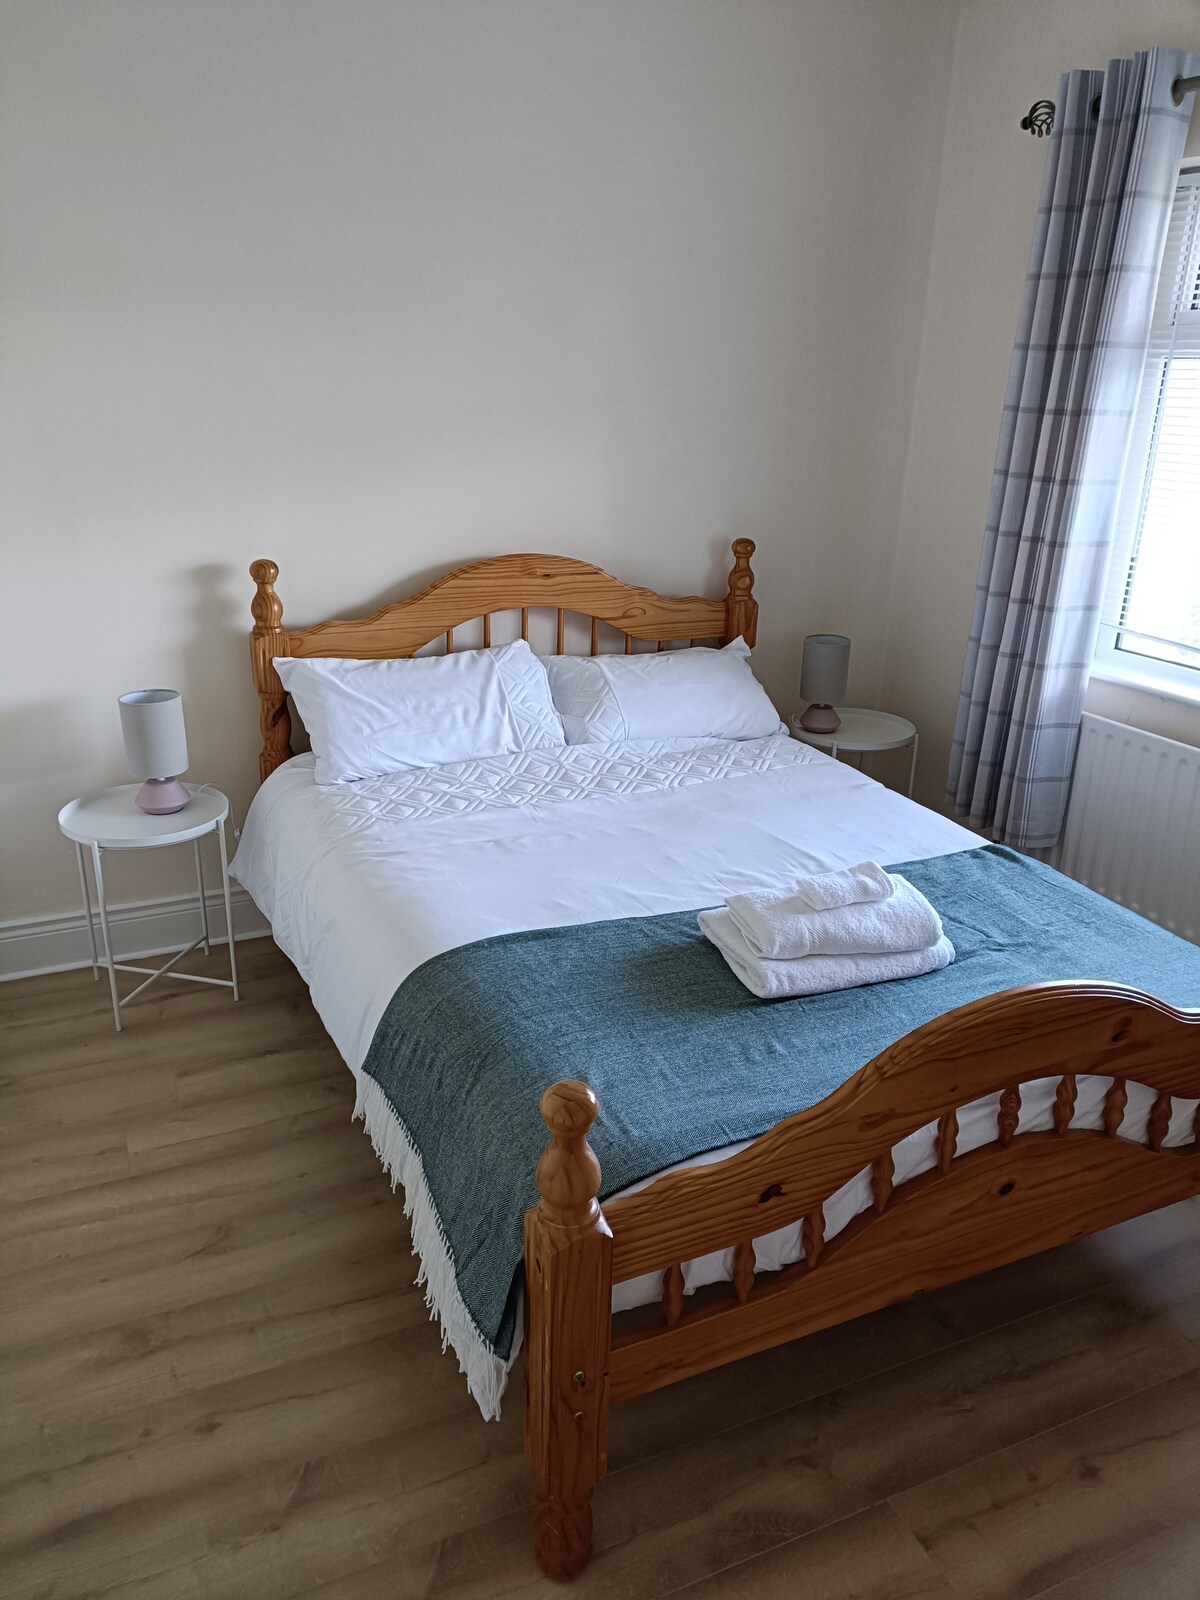 Portrush: Bluebell Cottage 2 mins to NW200 & beach